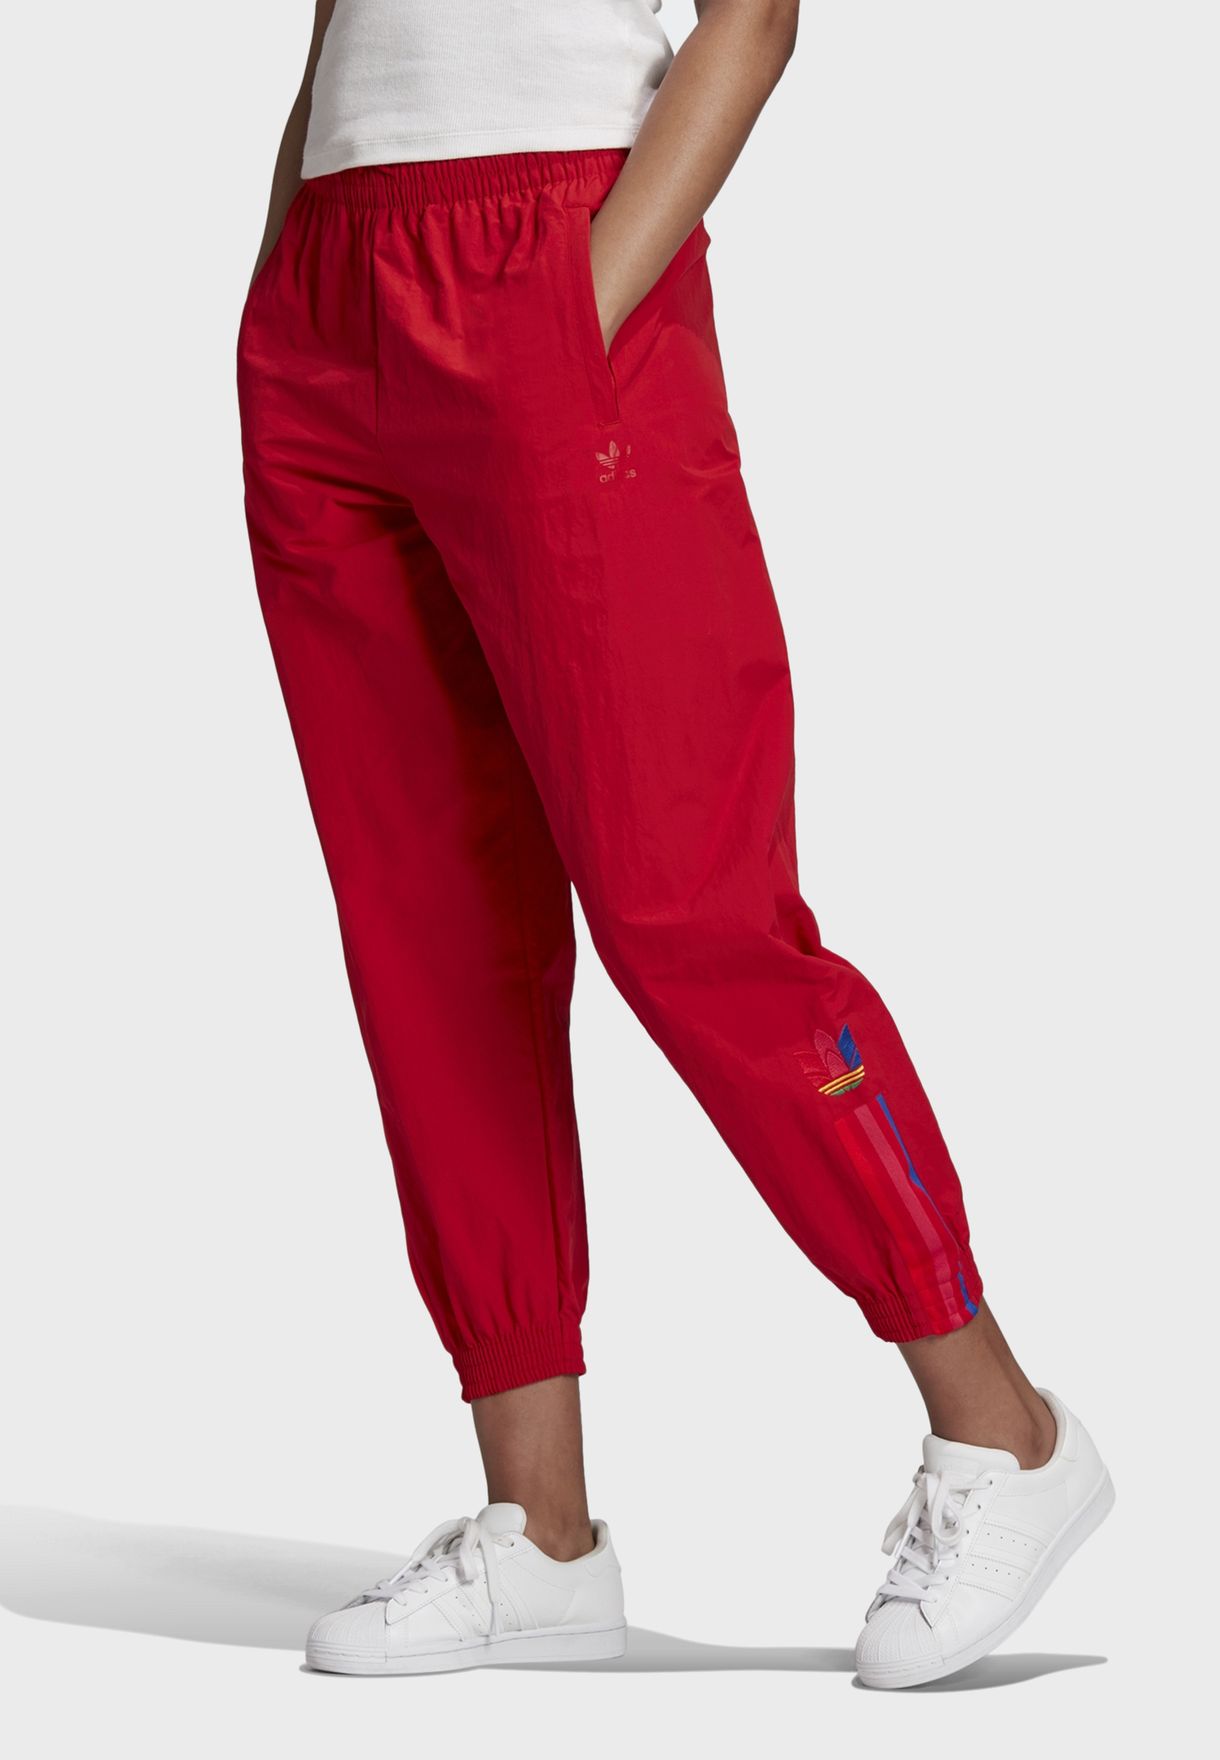 womens adidas red track pants